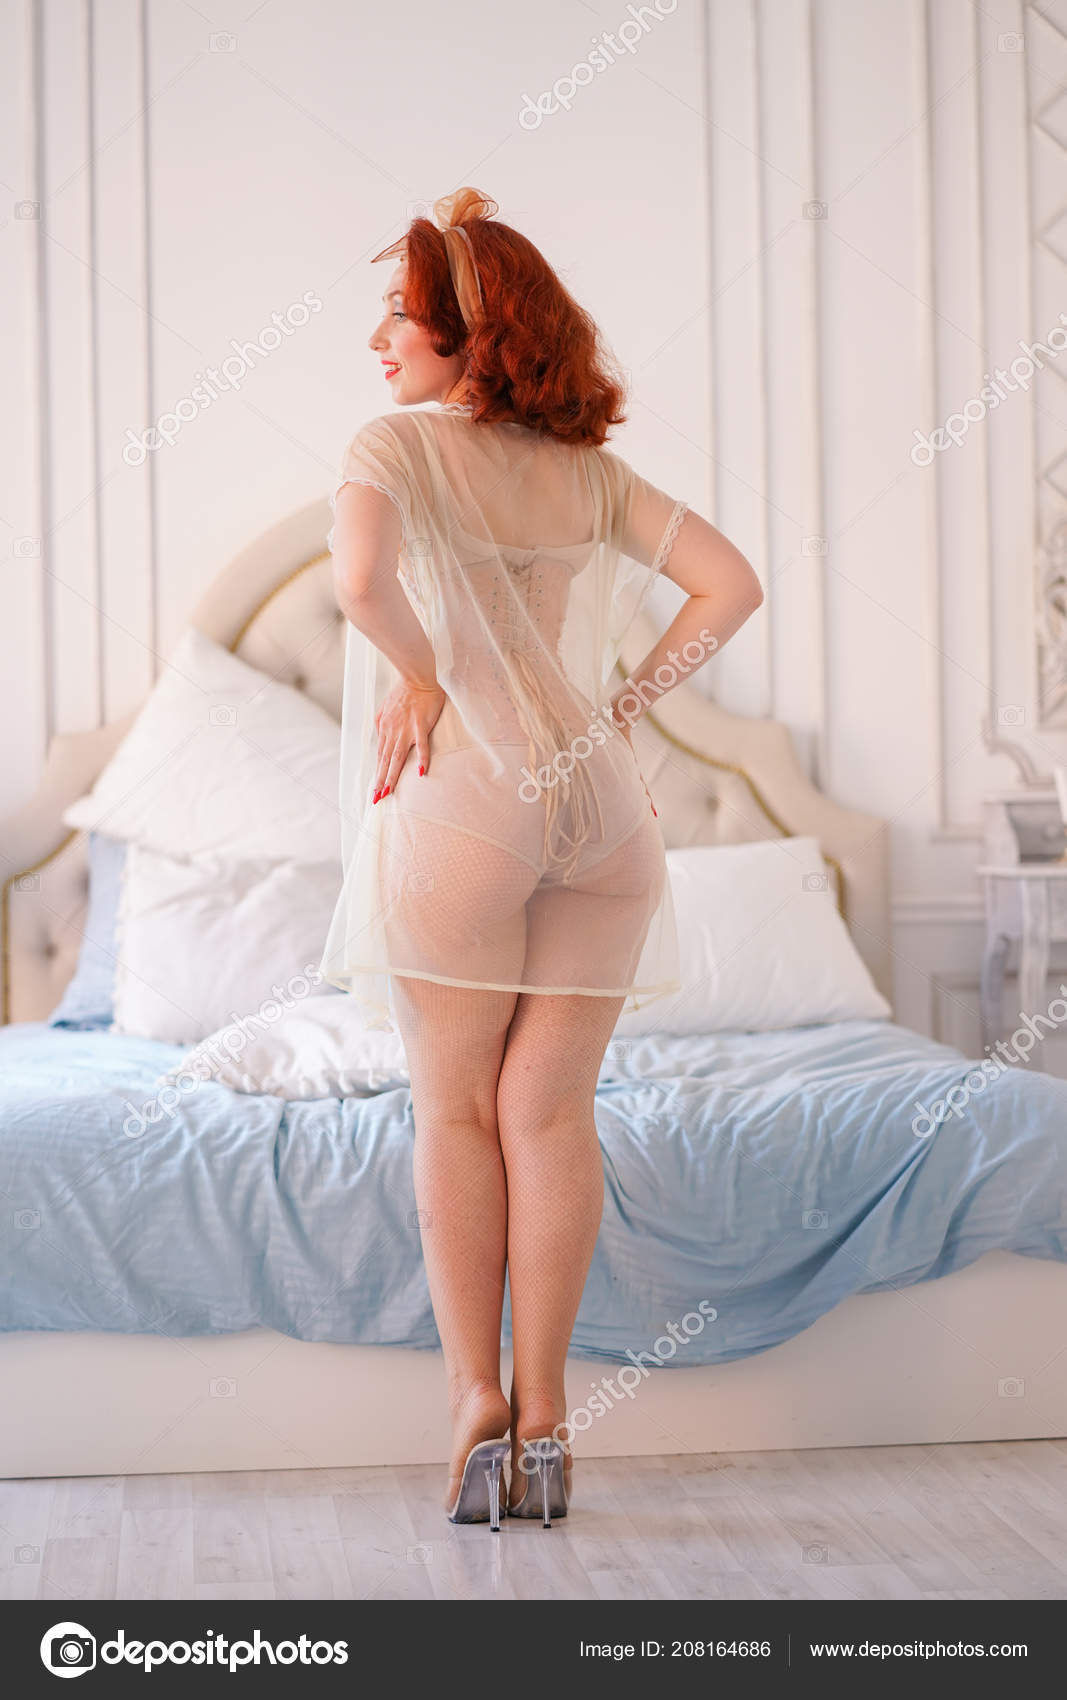 Charming Vintage Girl Posing Beige Pin Lingerie Tight Corset Sheer Stock Photo by ©agnadevi 208164686 picture